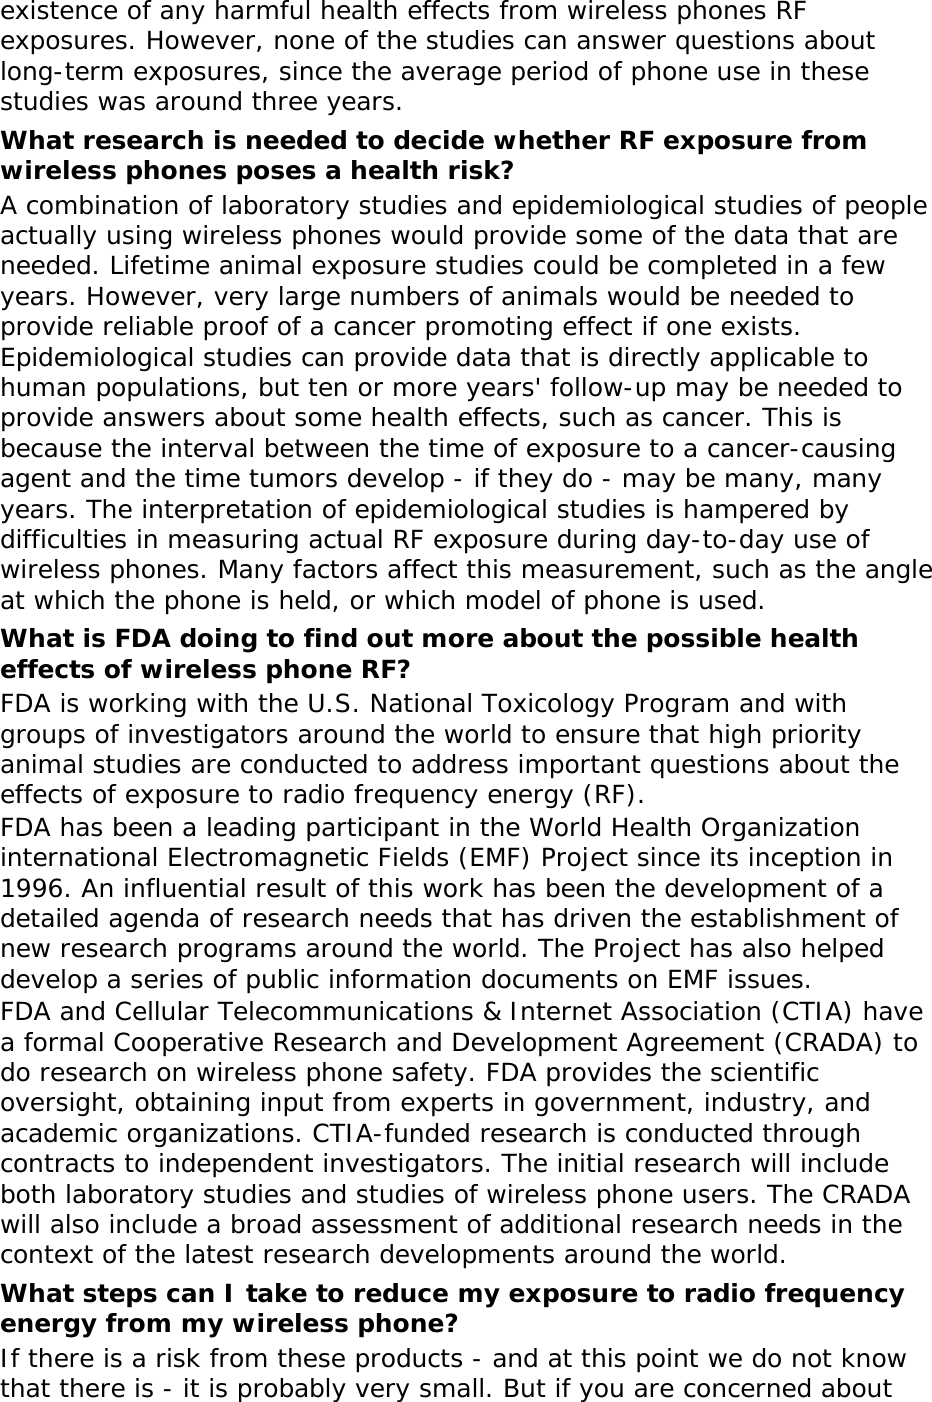 existence of any harmful health effects from wireless phones RF exposures. However, none of the studies can answer questions about long-term exposures, since the average period of phone use in these studies was around three years. What research is needed to decide whether RF exposure from wireless phones poses a health risk? A combination of laboratory studies and epidemiological studies of people actually using wireless phones would provide some of the data that are needed. Lifetime animal exposure studies could be completed in a few years. However, very large numbers of animals would be needed to provide reliable proof of a cancer promoting effect if one exists. Epidemiological studies can provide data that is directly applicable to human populations, but ten or more years&apos; follow-up may be needed to provide answers about some health effects, such as cancer. This is because the interval between the time of exposure to a cancer-causing agent and the time tumors develop - if they do - may be many, many years. The interpretation of epidemiological studies is hampered by difficulties in measuring actual RF exposure during day-to-day use of wireless phones. Many factors affect this measurement, such as the angle at which the phone is held, or which model of phone is used. What is FDA doing to find out more about the possible health effects of wireless phone RF? FDA is working with the U.S. National Toxicology Program and with groups of investigators around the world to ensure that high priority animal studies are conducted to address important questions about the effects of exposure to radio frequency energy (RF). FDA has been a leading participant in the World Health Organization international Electromagnetic Fields (EMF) Project since its inception in 1996. An influential result of this work has been the development of a detailed agenda of research needs that has driven the establishment of new research programs around the world. The Project has also helped develop a series of public information documents on EMF issues. FDA and Cellular Telecommunications &amp; Internet Association (CTIA) have a formal Cooperative Research and Development Agreement (CRADA) to do research on wireless phone safety. FDA provides the scientific oversight, obtaining input from experts in government, industry, and academic organizations. CTIA-funded research is conducted through contracts to independent investigators. The initial research will include both laboratory studies and studies of wireless phone users. The CRADA will also include a broad assessment of additional research needs in the context of the latest research developments around the world. What steps can I take to reduce my exposure to radio frequency energy from my wireless phone? If there is a risk from these products - and at this point we do not know that there is - it is probably very small. But if you are concerned about 